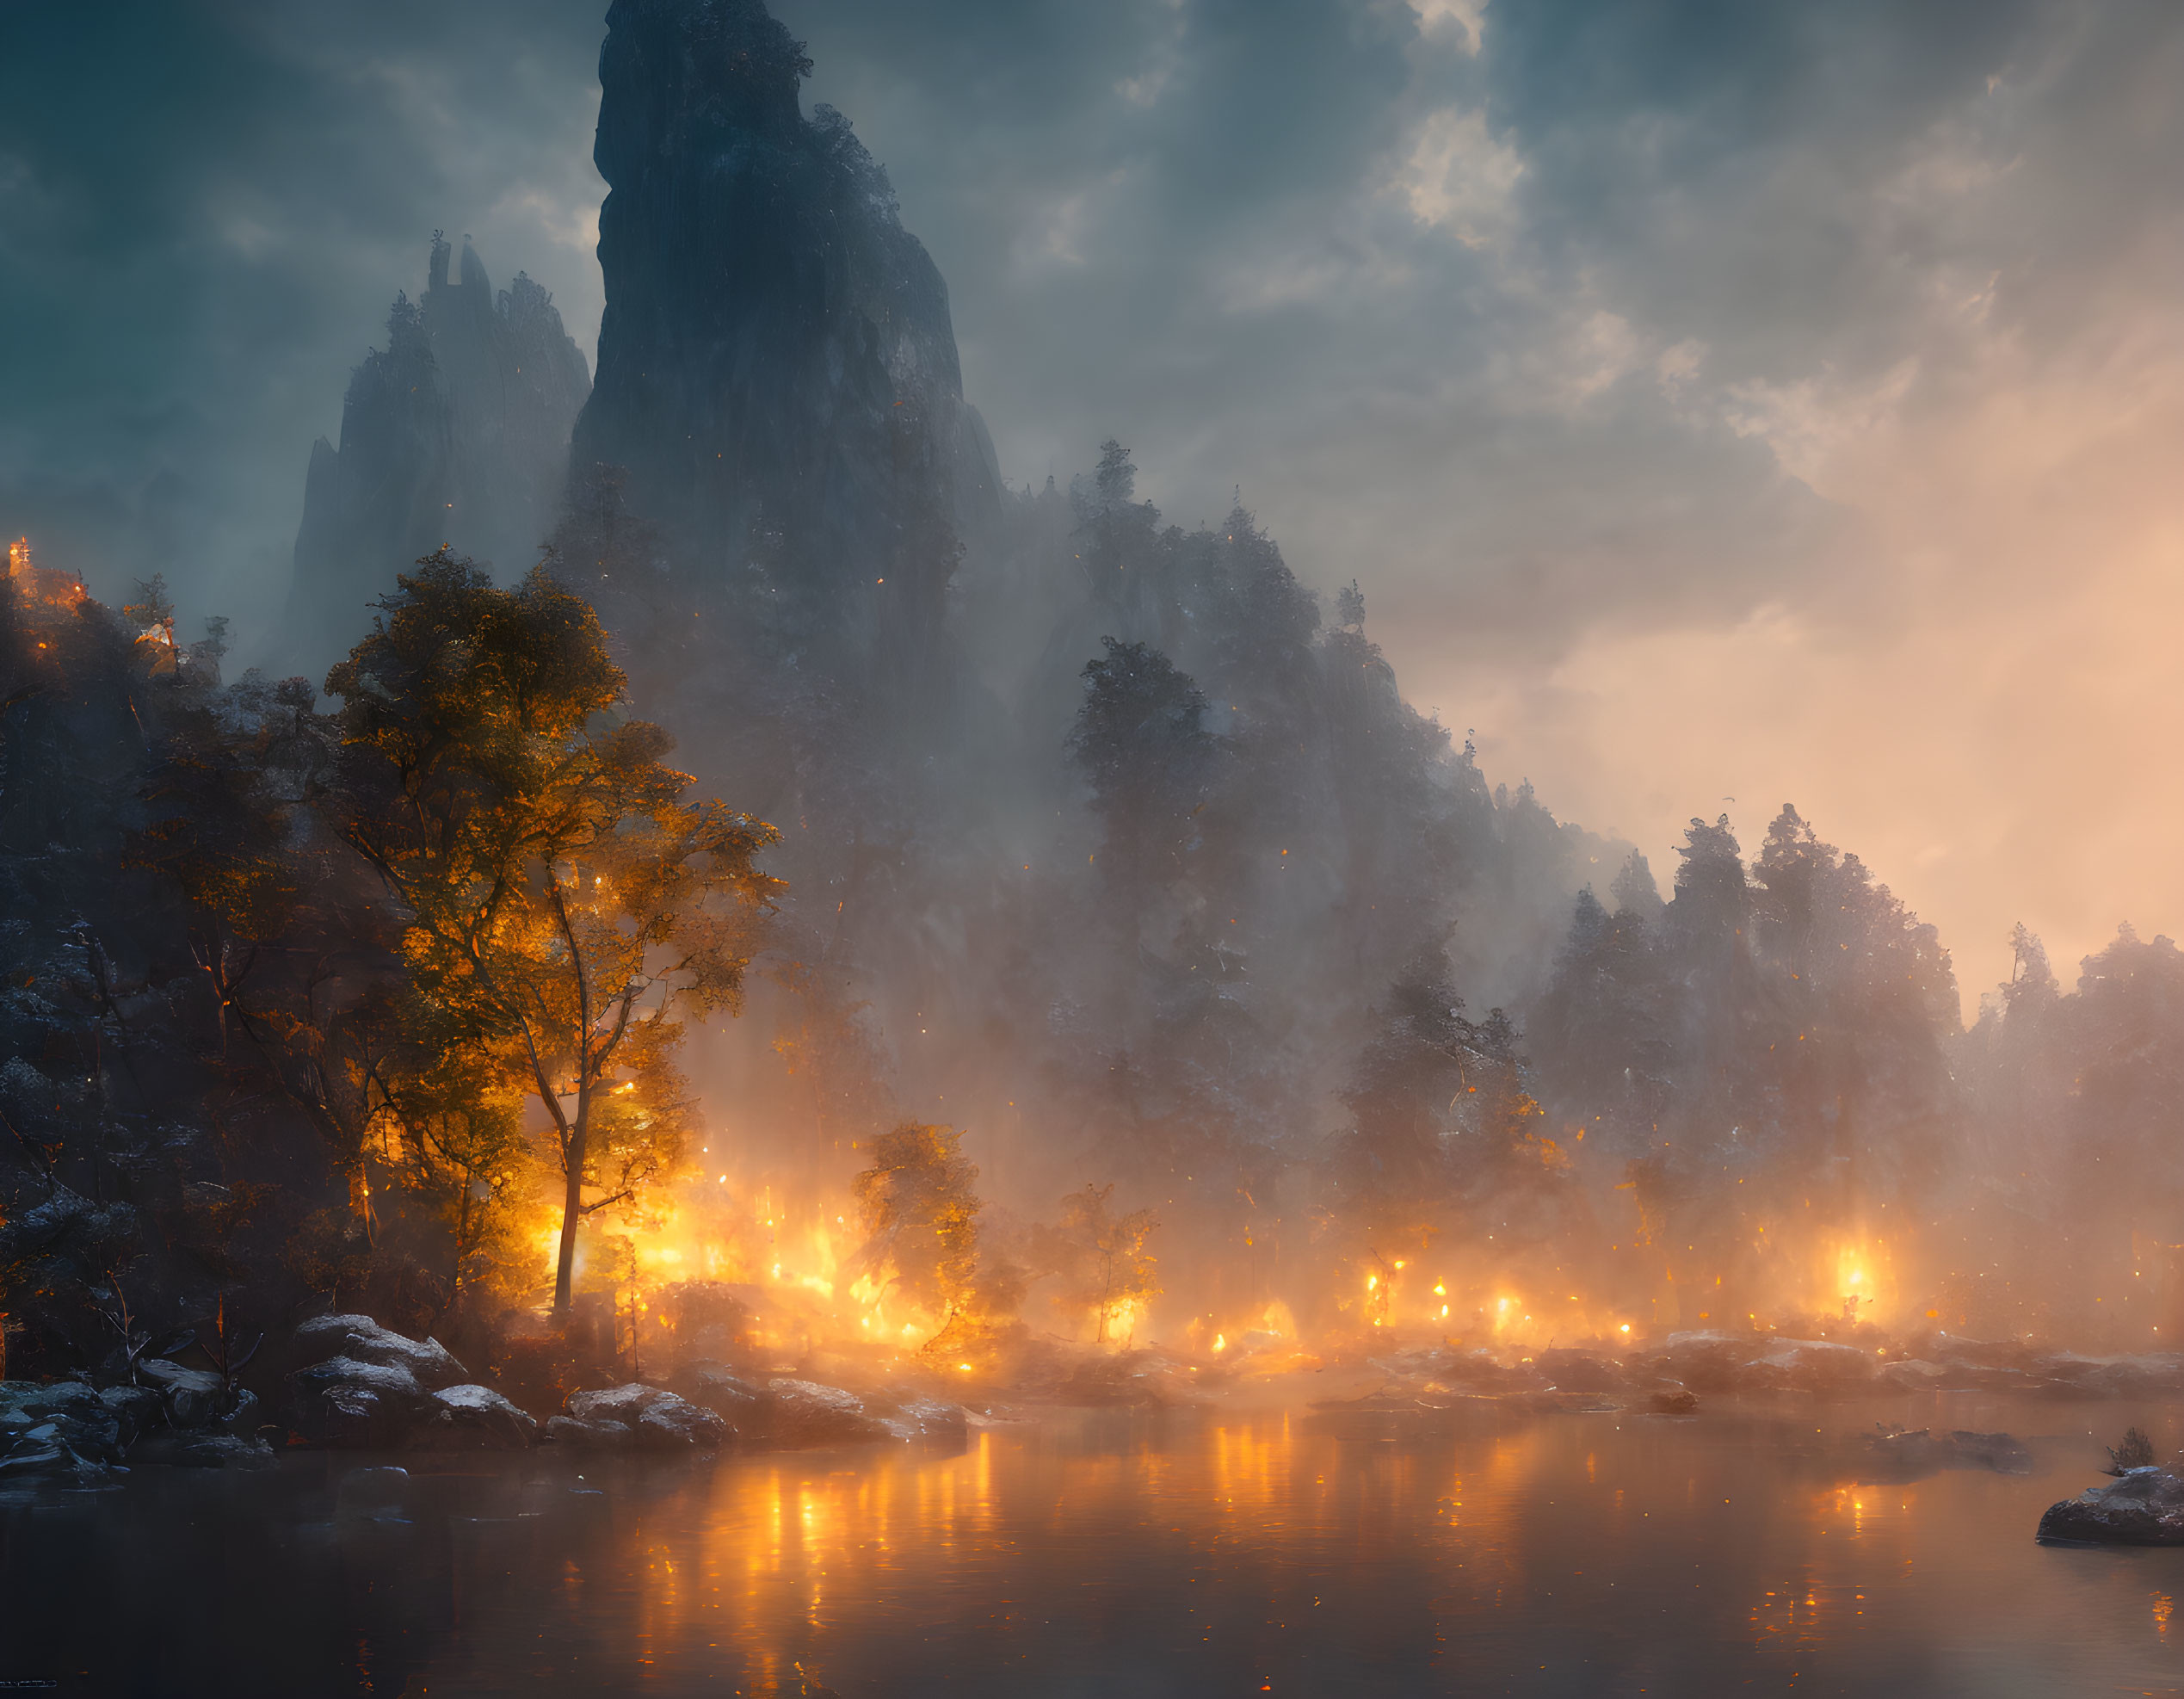 Majestic forested mountains with serene river and mystical fog at dusk or dawn